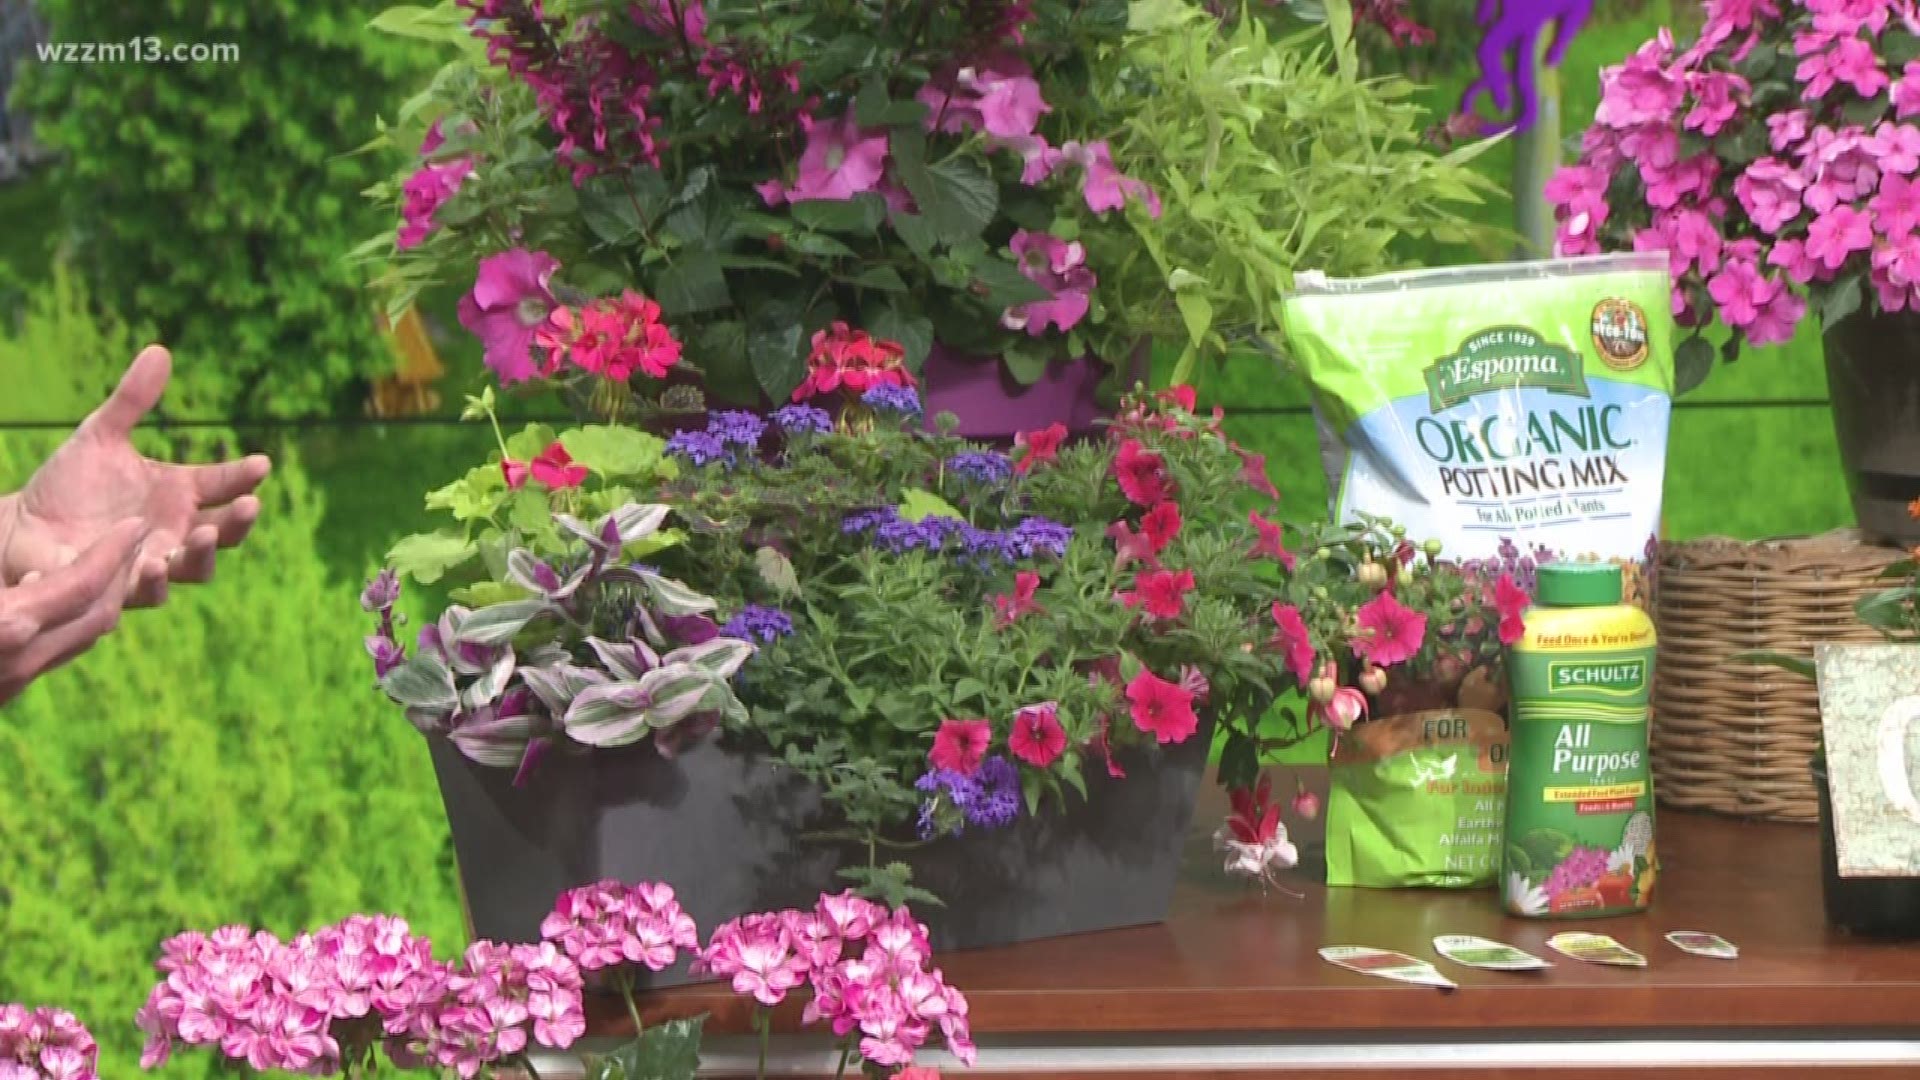 Gardening might seem like a difficult challenge, but with the right tools and knowledge, anyone can be successful. Even if you don't have a yard to work in, everyone can garden. Bill Bird, a successful gardener and employee at Jonkers Garden, shares some of the things that help him be successful when it comes to container gardening.